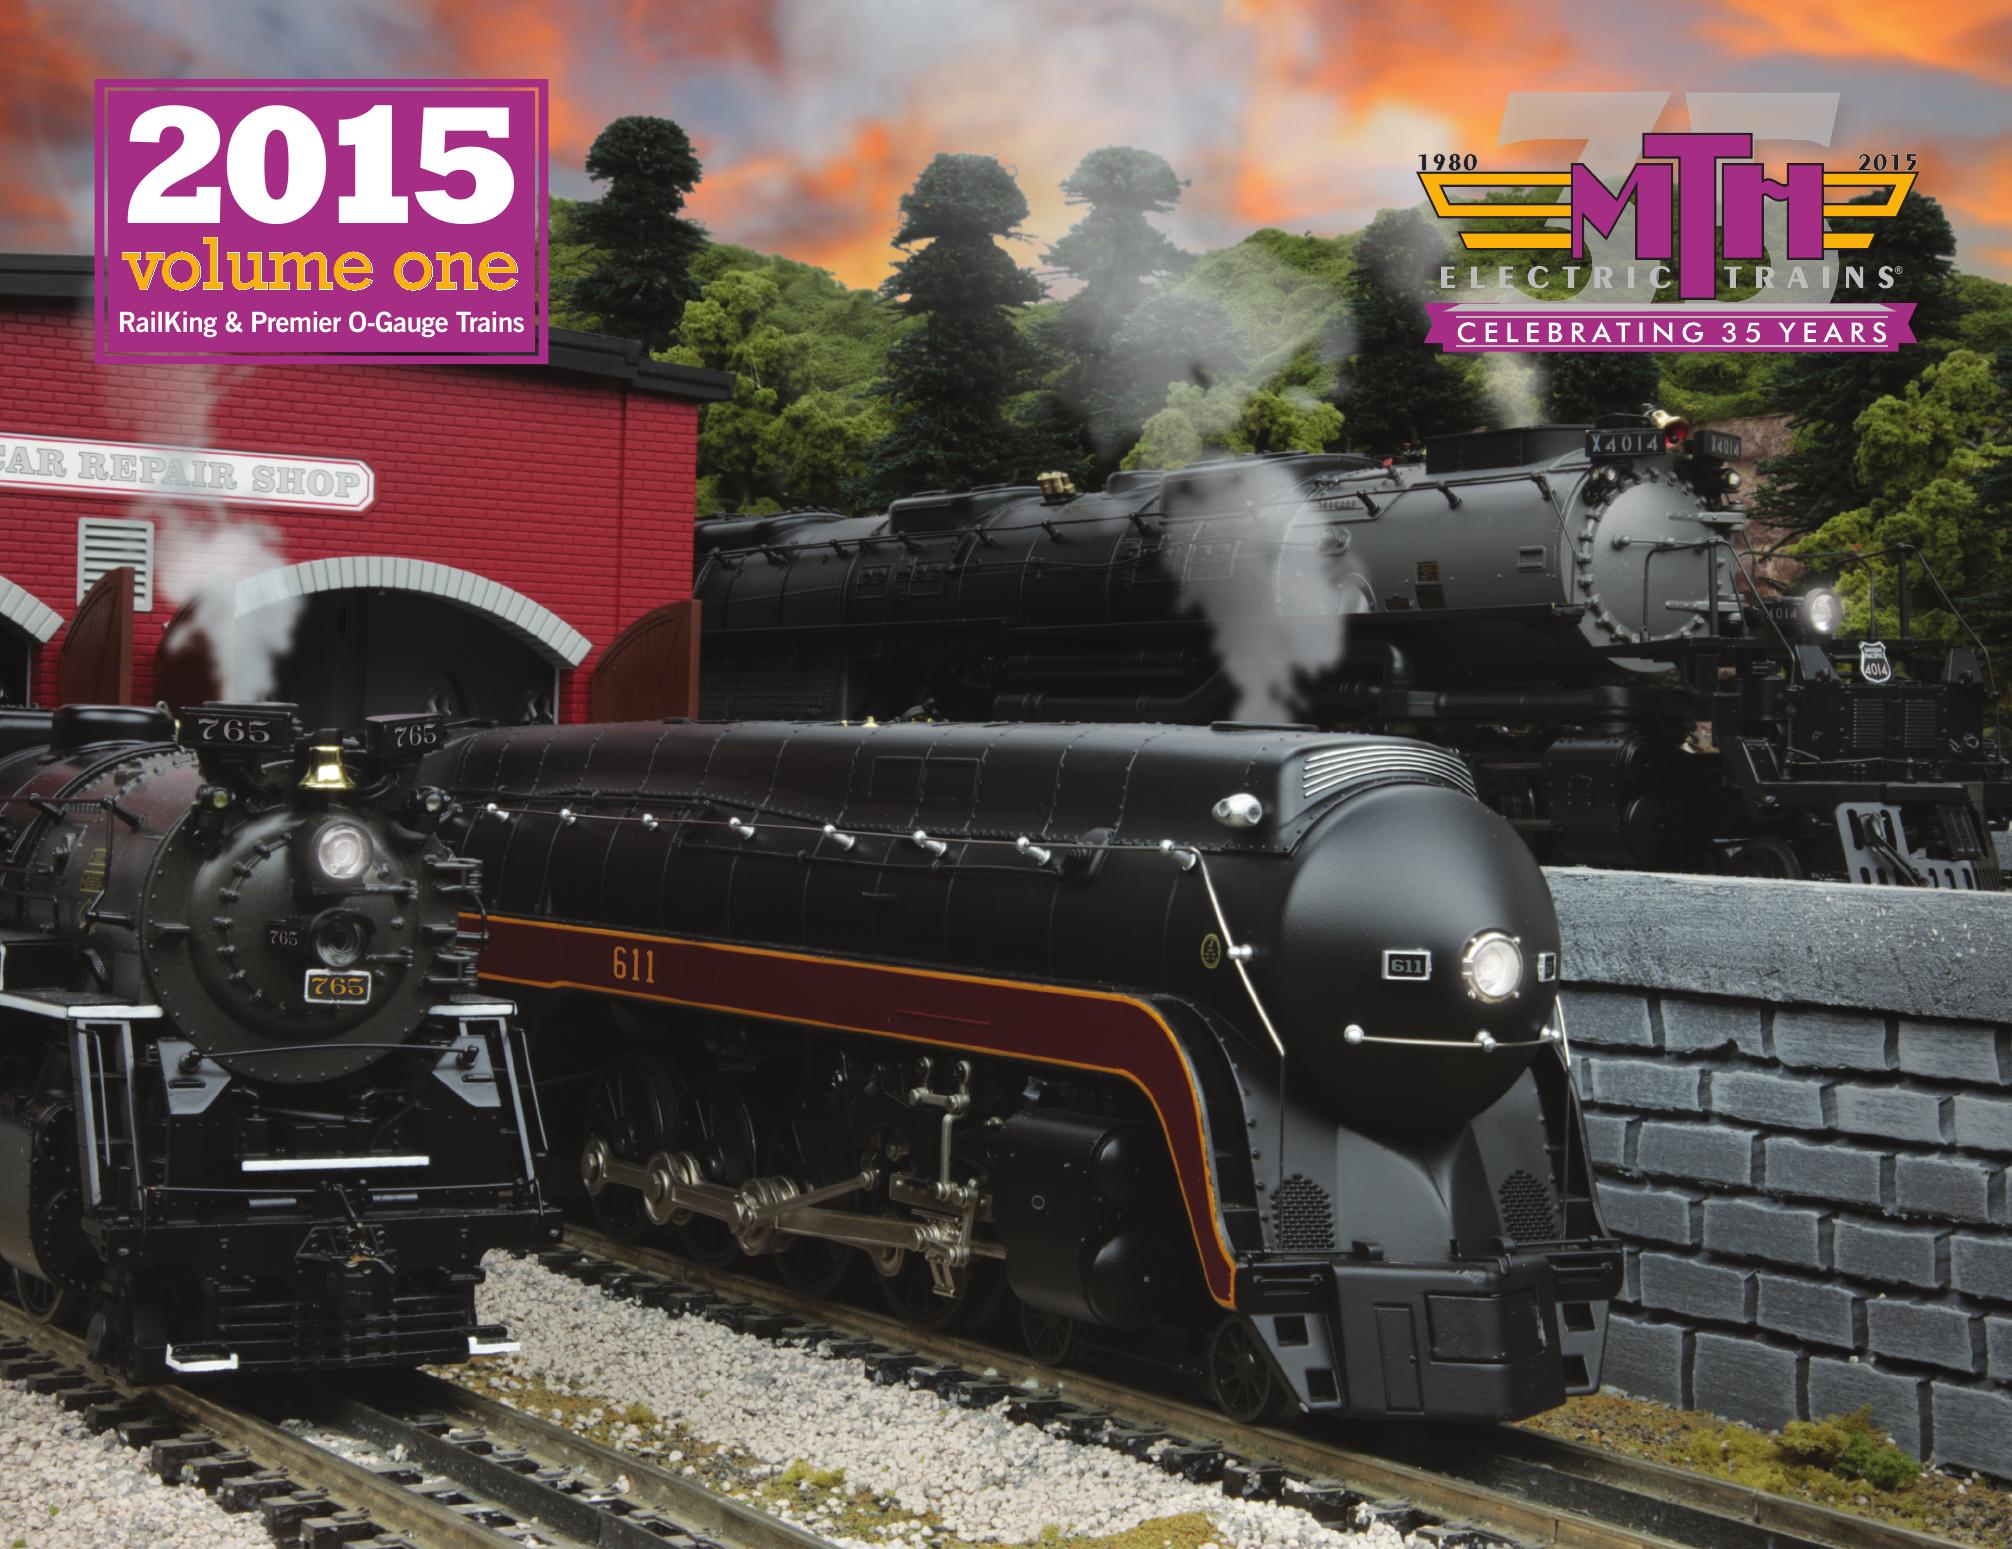 mth electric trains catalog